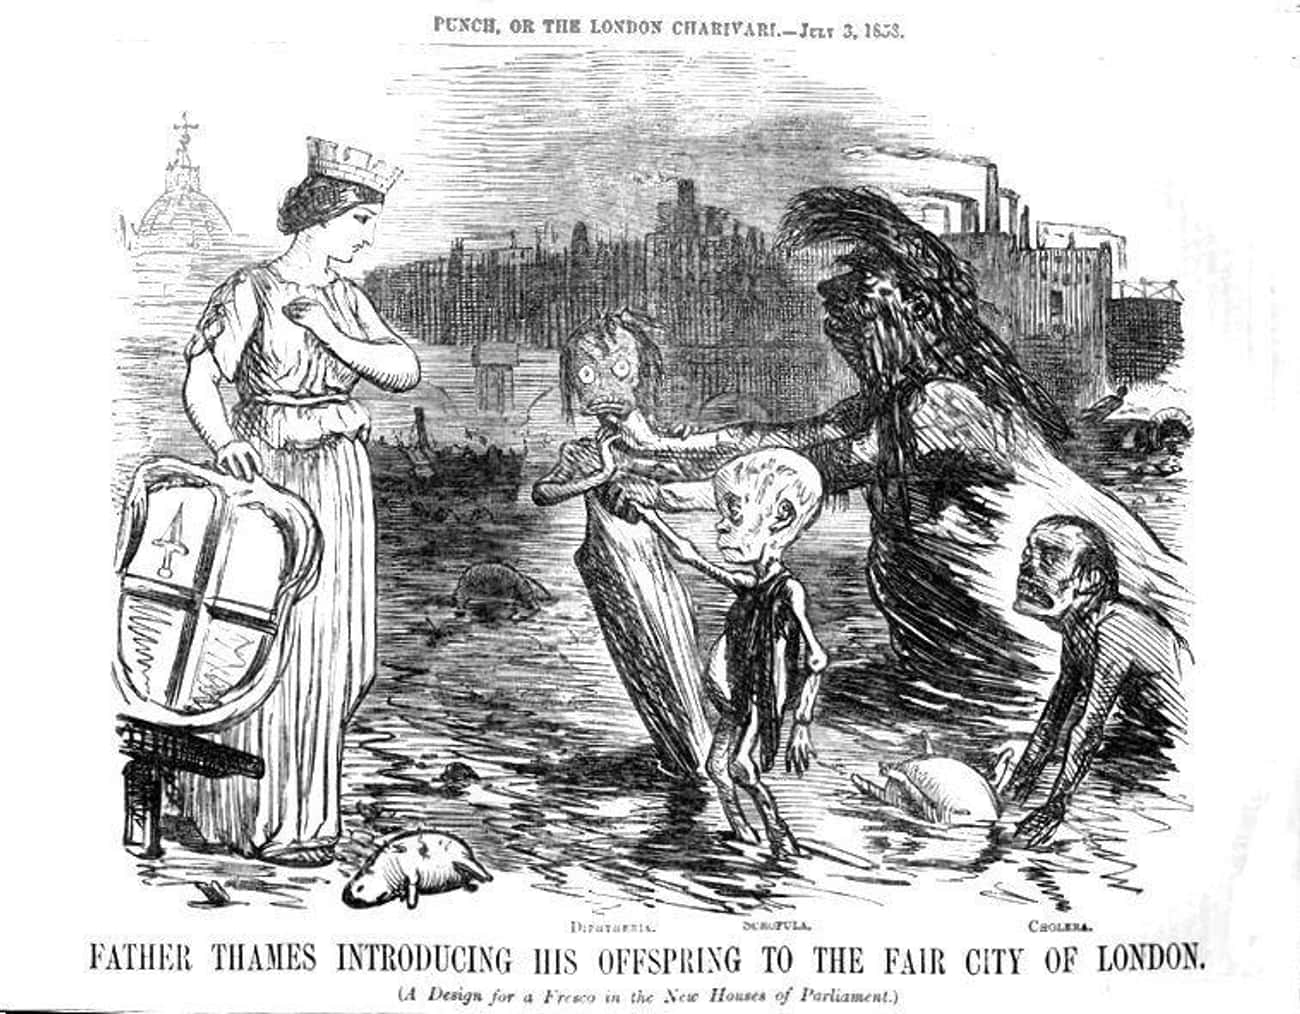 They Lived Through 'The Great Stink' Of 1858